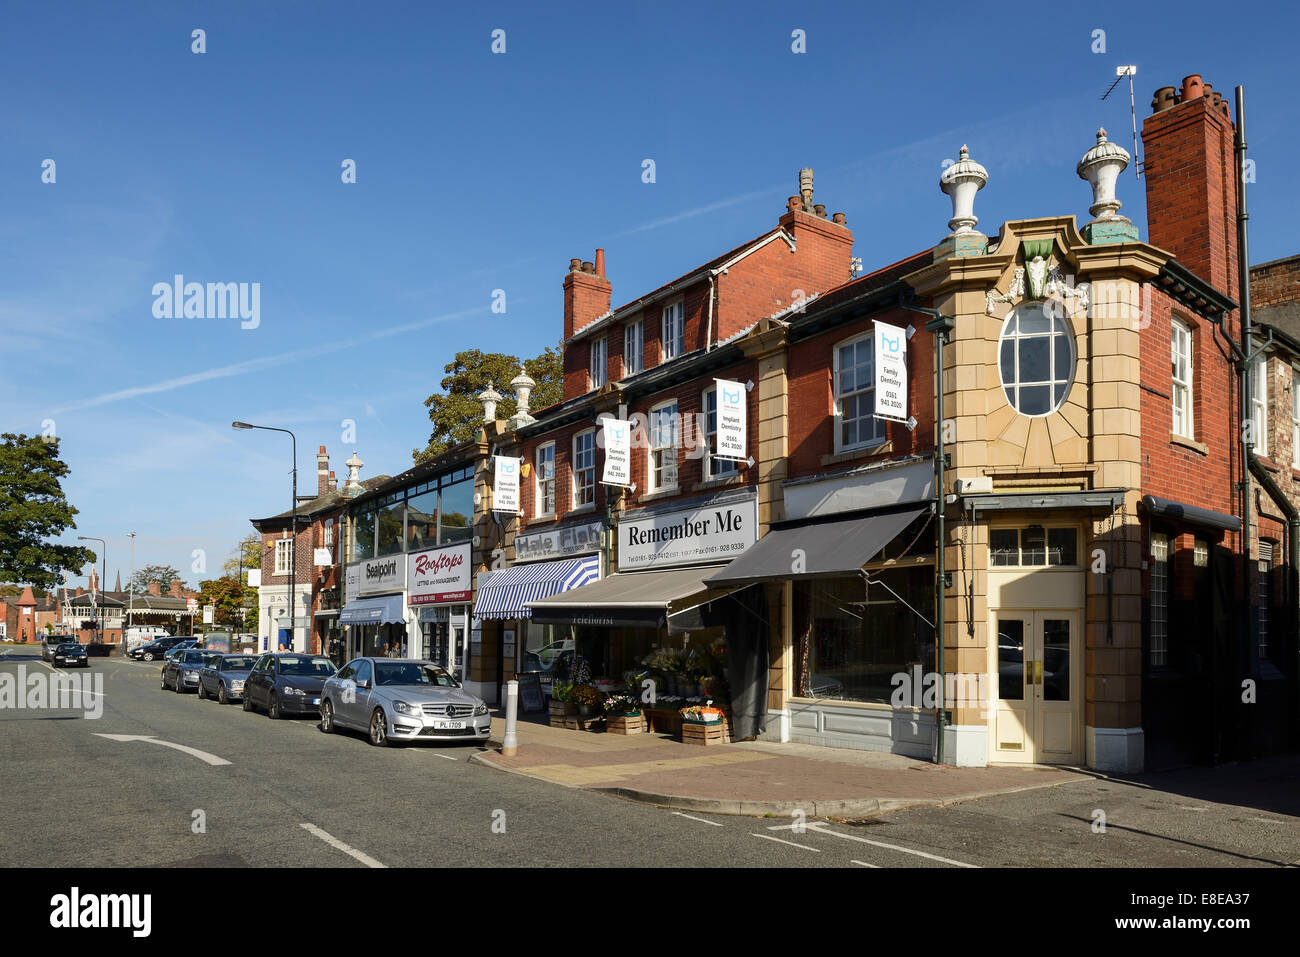 Shops and businesses on Ashley Road in the centre of Hale village Greater Manchester UK Stock Photo